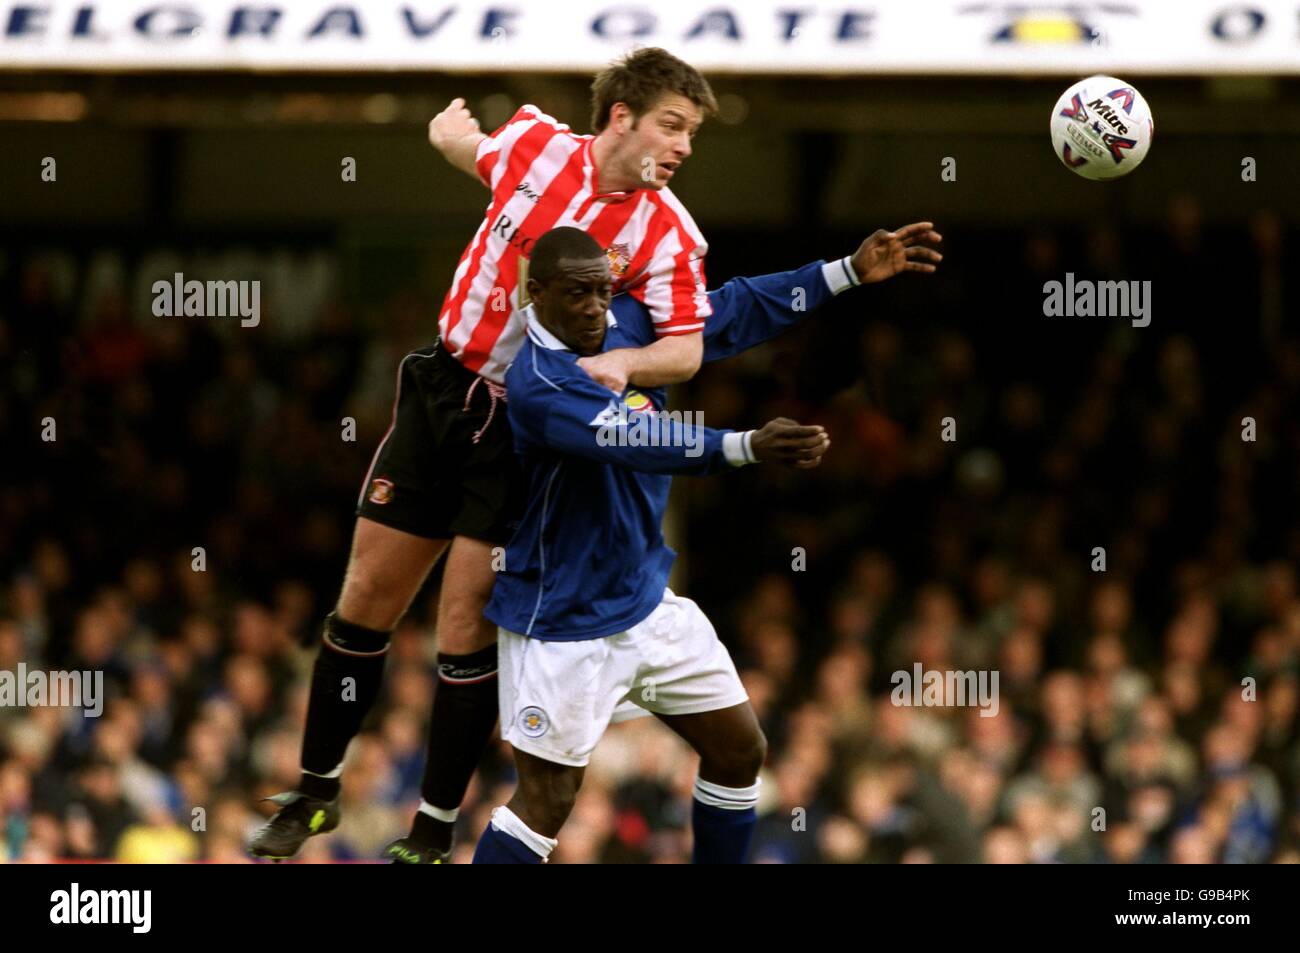 Sunderland's Paul Butler (l) heads clear from Leicester City's Emile Heskey (r) Stock Photo